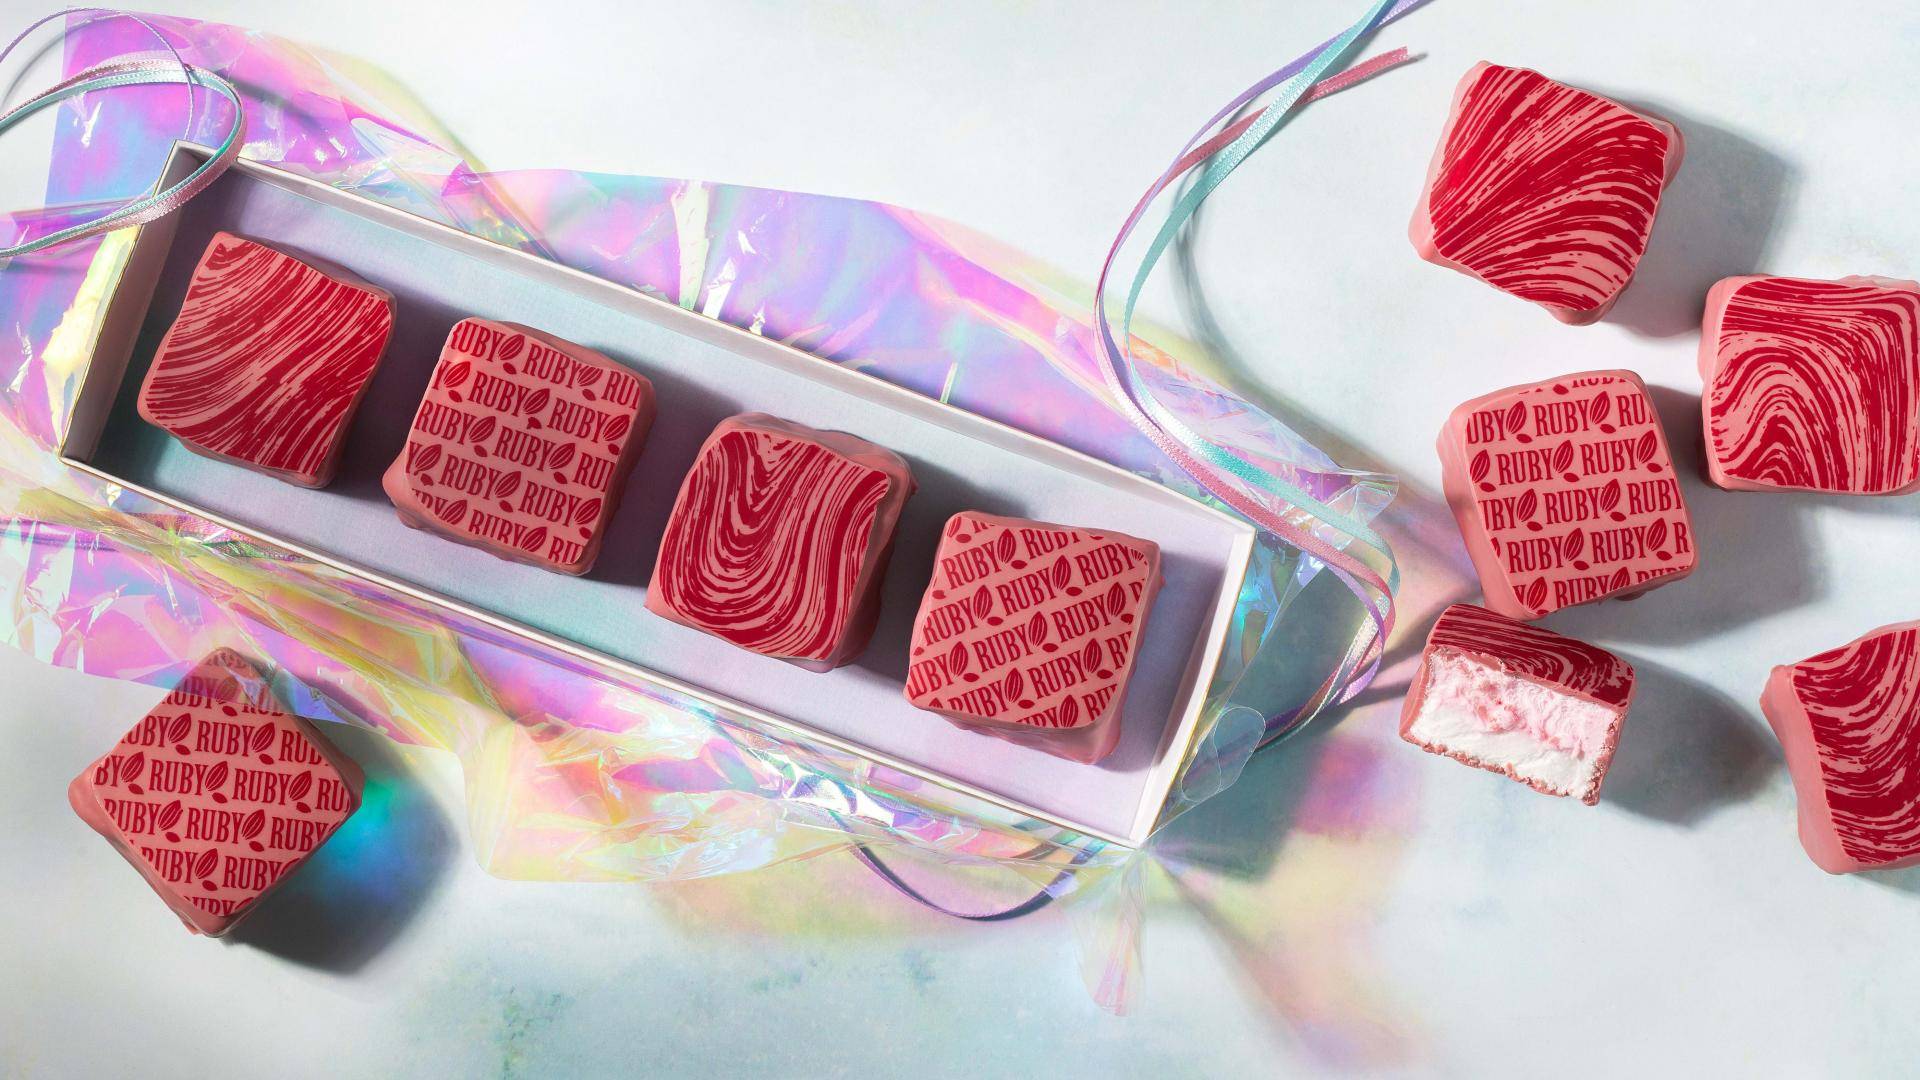 Ruby coated marshmallows with prints